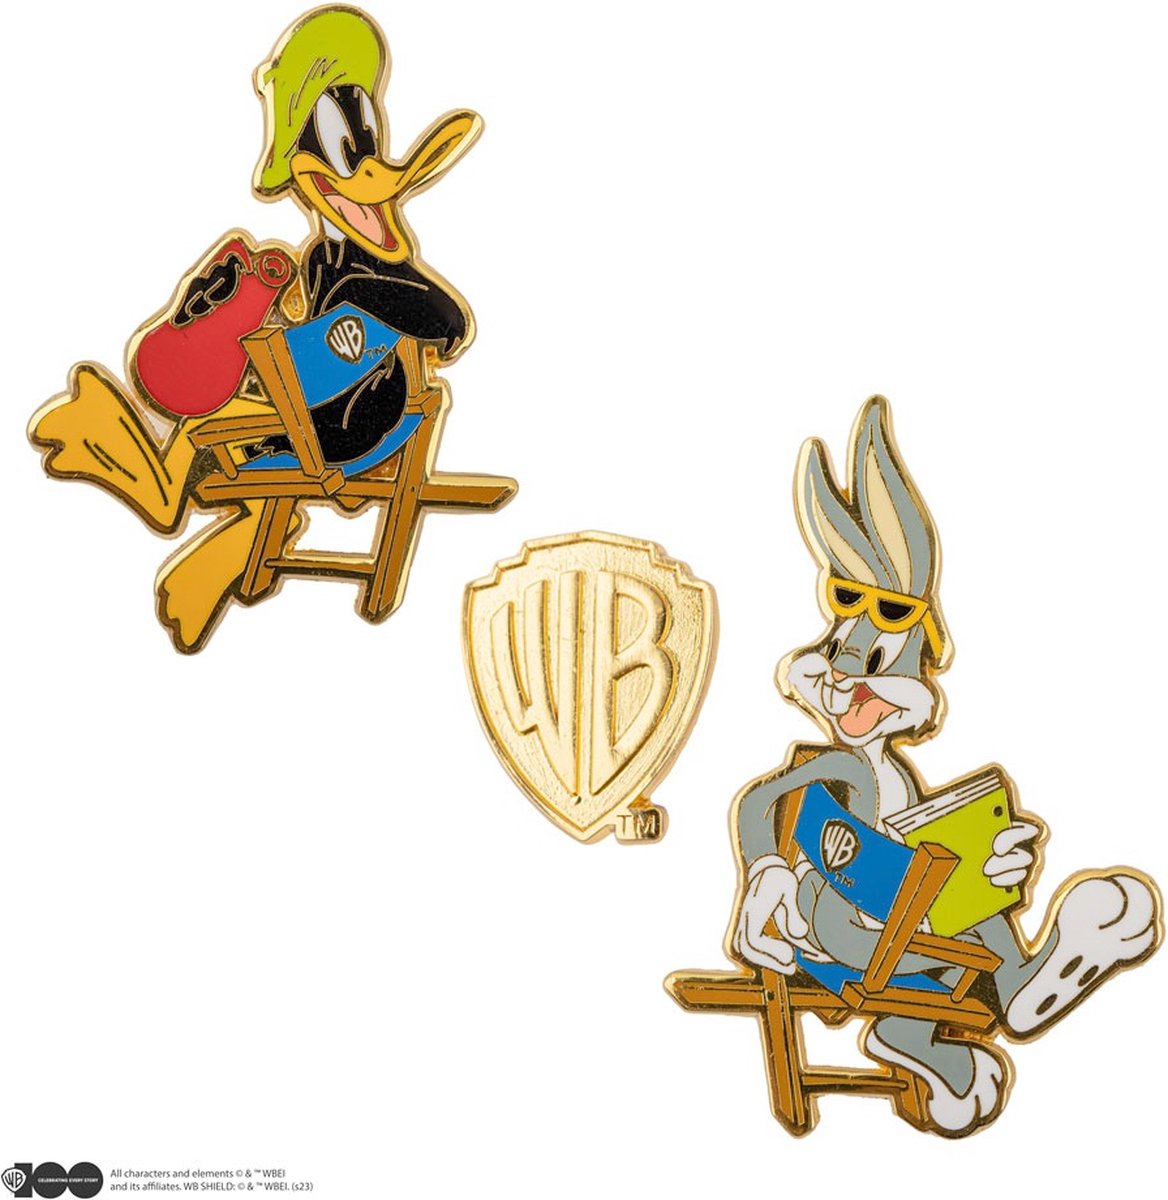 Cinereplicas Looney Tunes Pin 2-Pack Bugs Bunny and Daffy Duck at Warner Bros Studio Multicolours